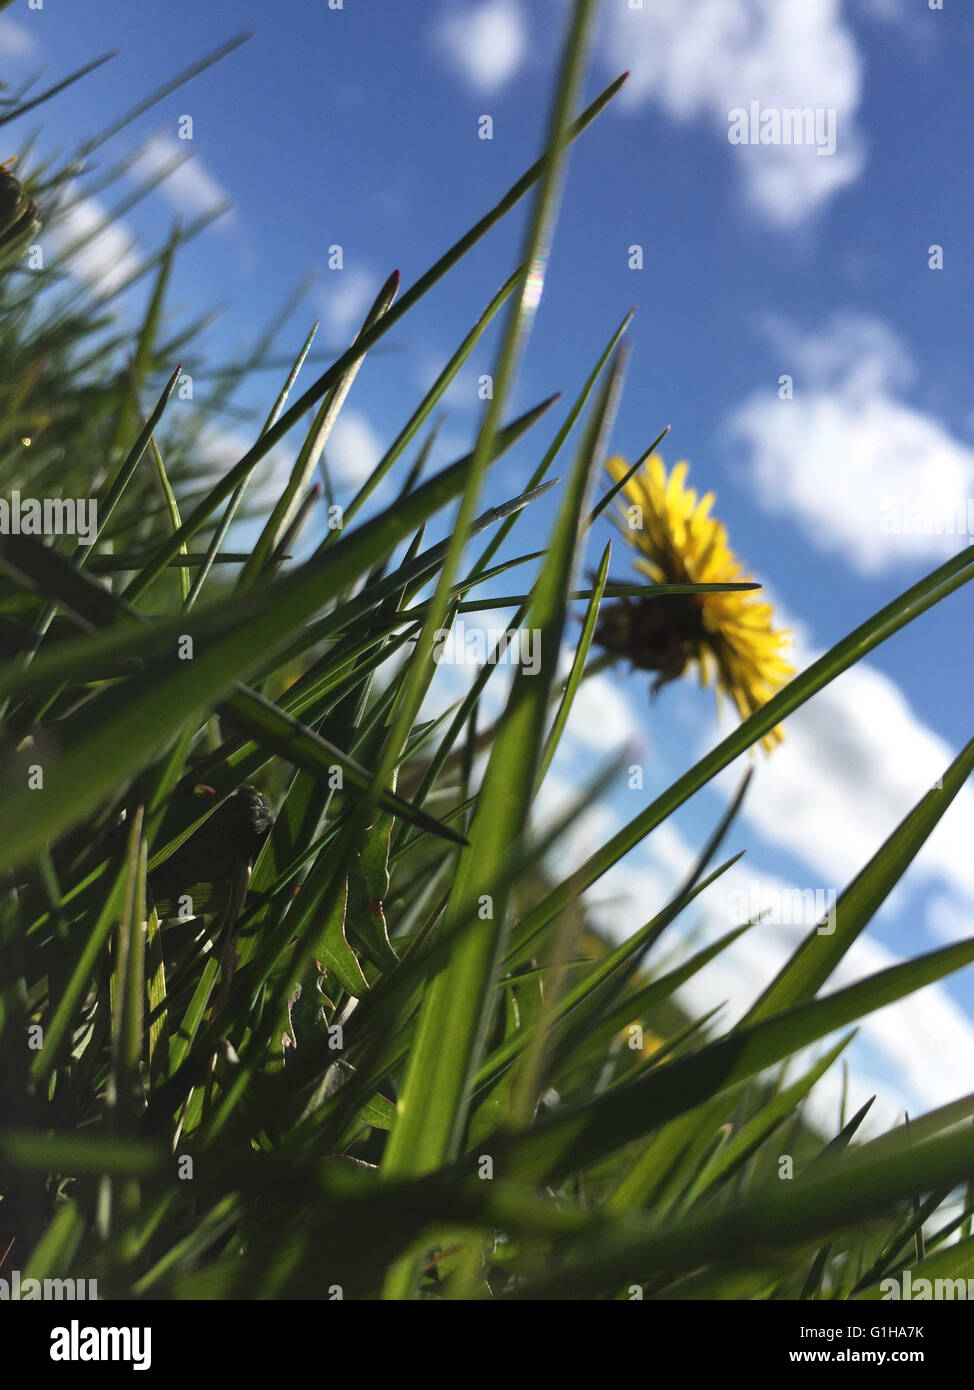 Grassy hill with dandelion bloom. Stock Photo